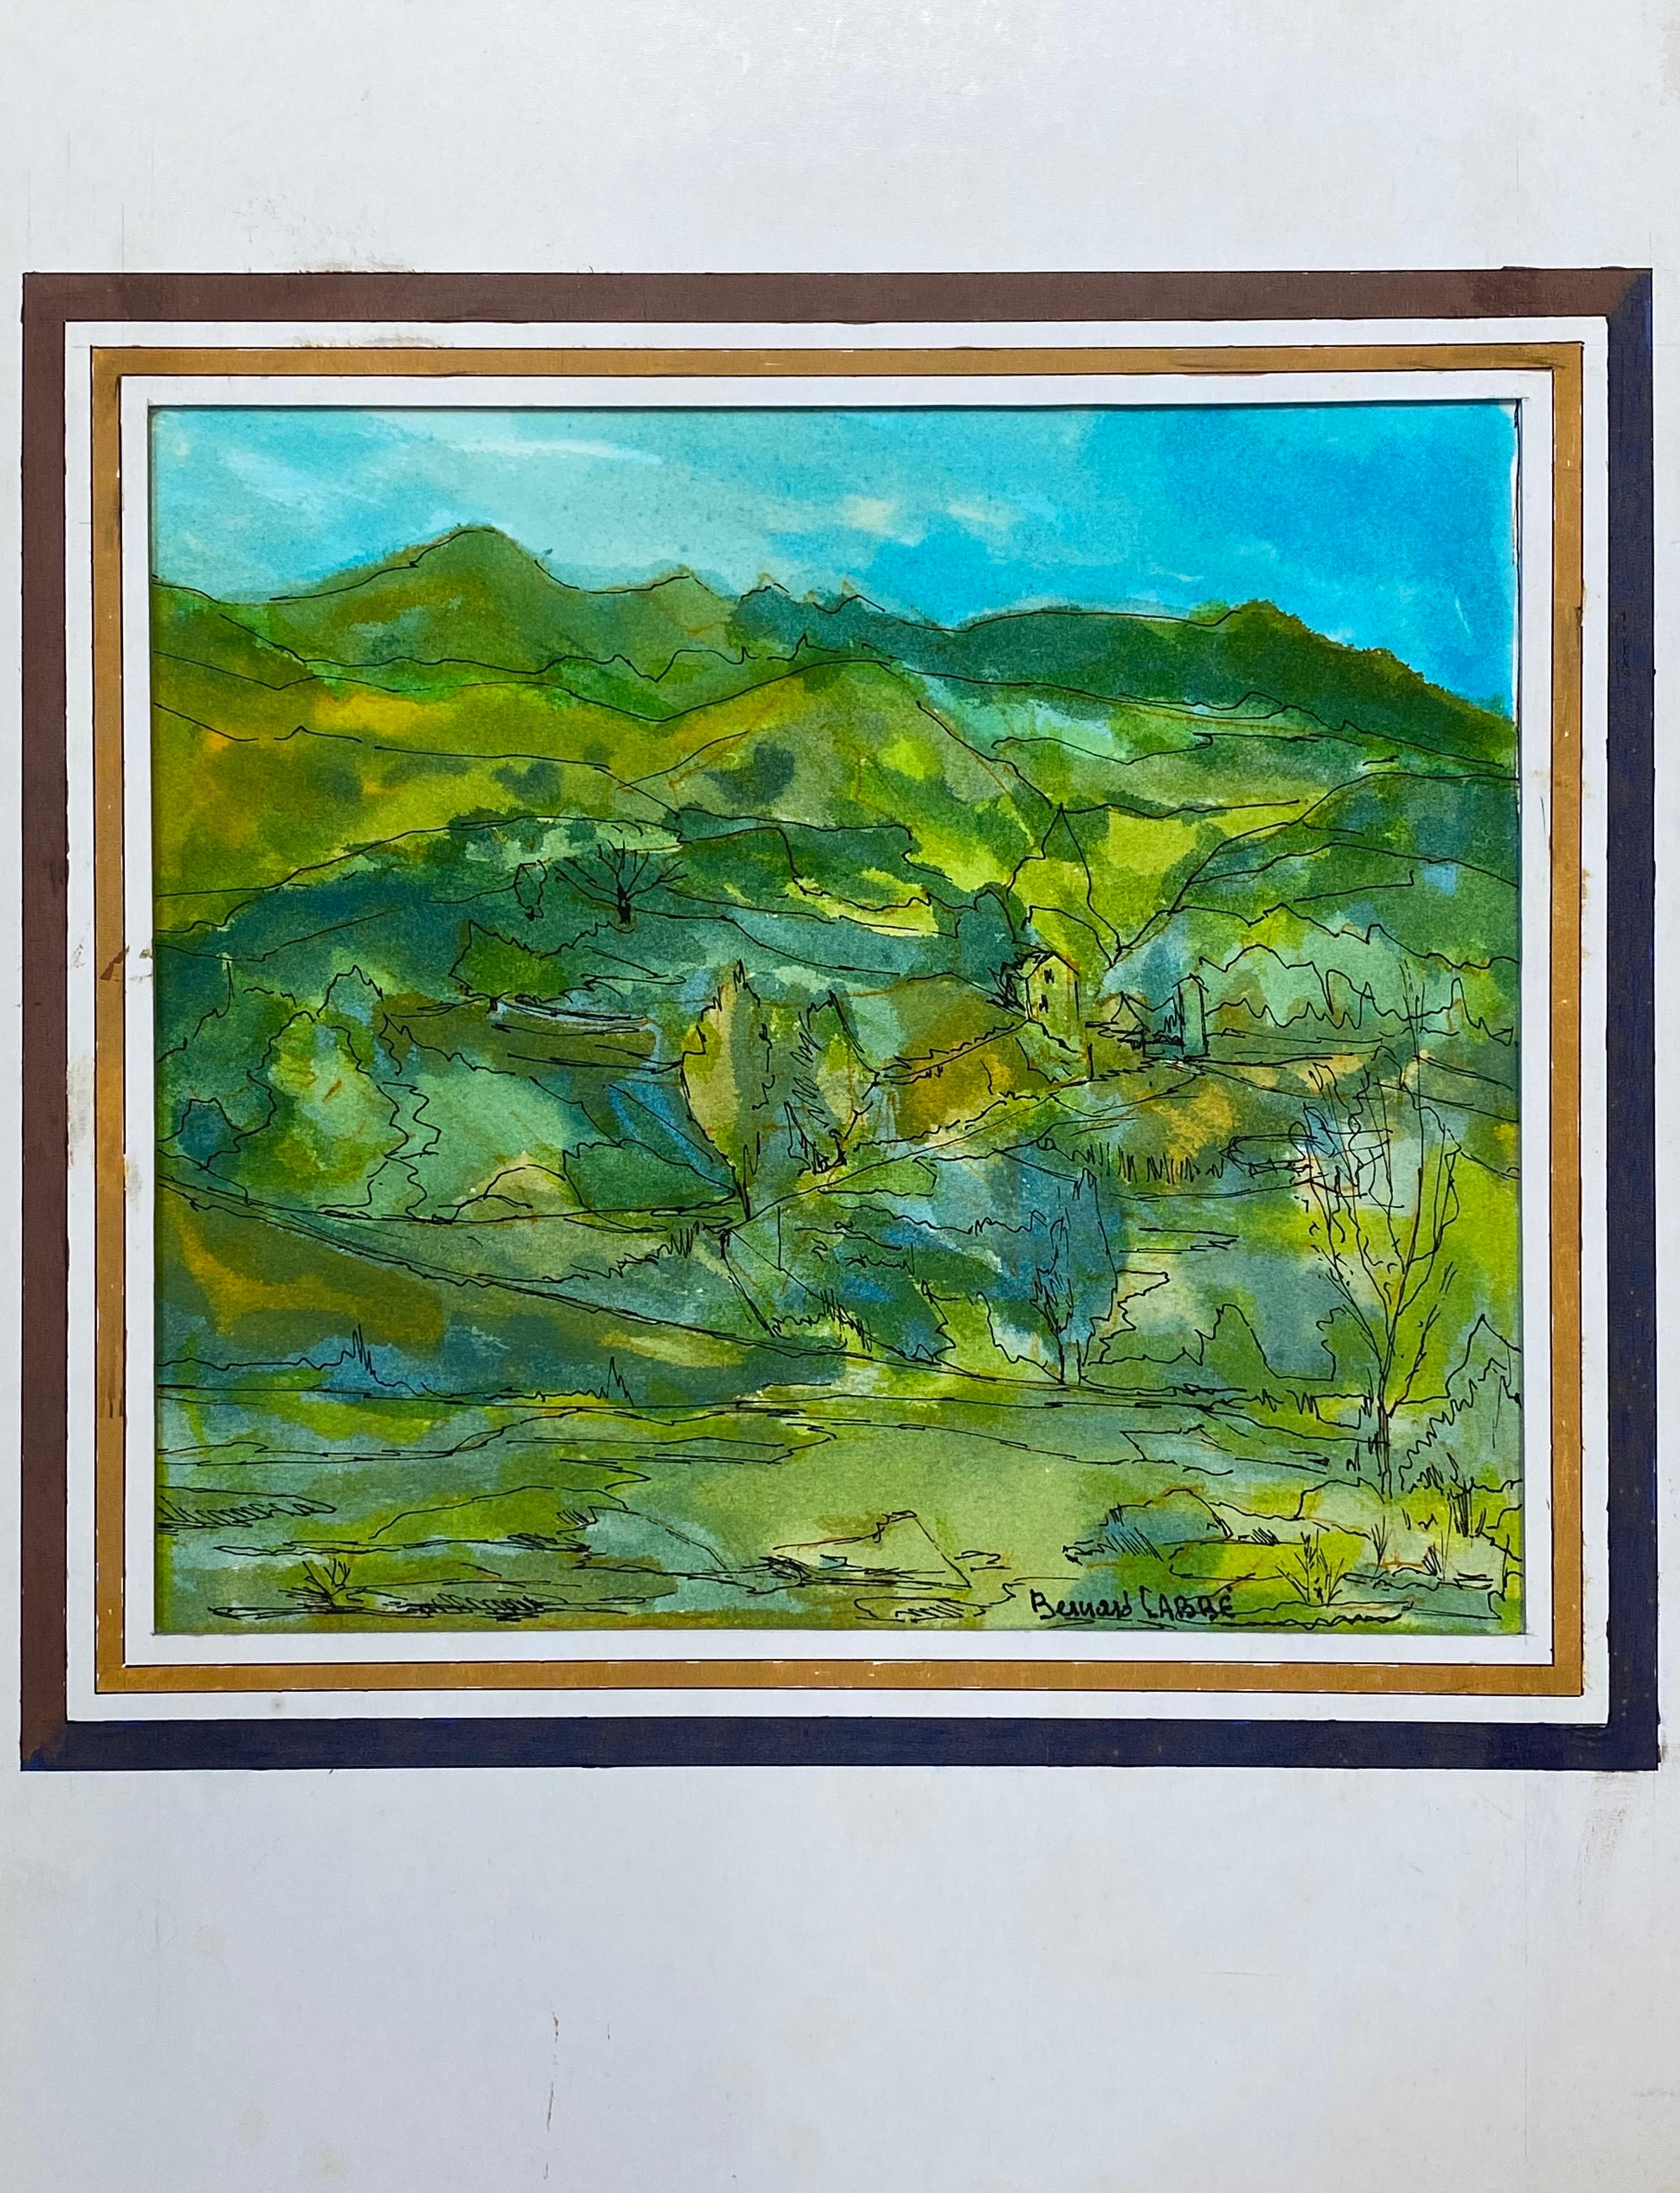 French landscape
by Bernard Labbe (French mid 20th century)
Original watercolour/ gouache painting on artist paper, mounted on board
Size: 16 x 15.5 inches
Condition: very good and ready to be enjoyed. 

Provenance: the artists atelier/